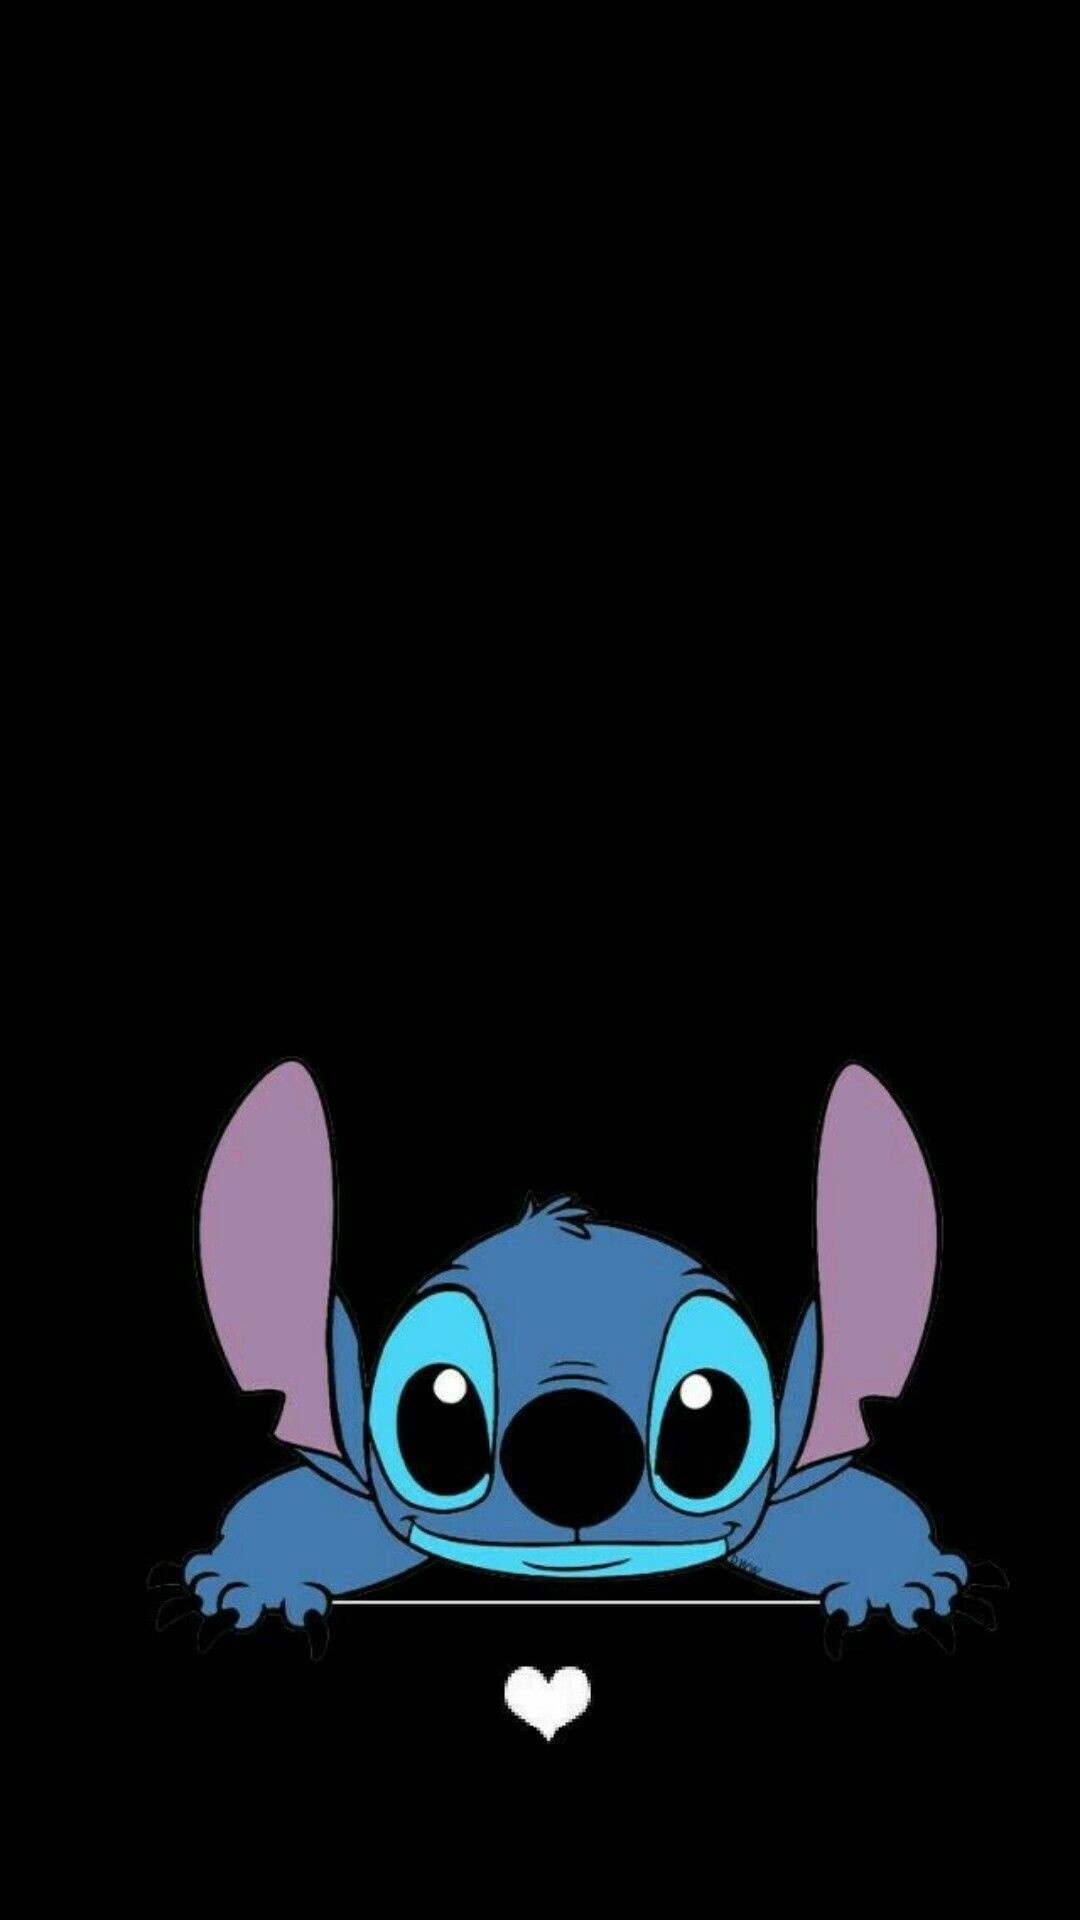 Stitch animation, Stitch iPhone wallpapers, Adorable blue creature, Fan art, 1080x1920 Full HD Handy